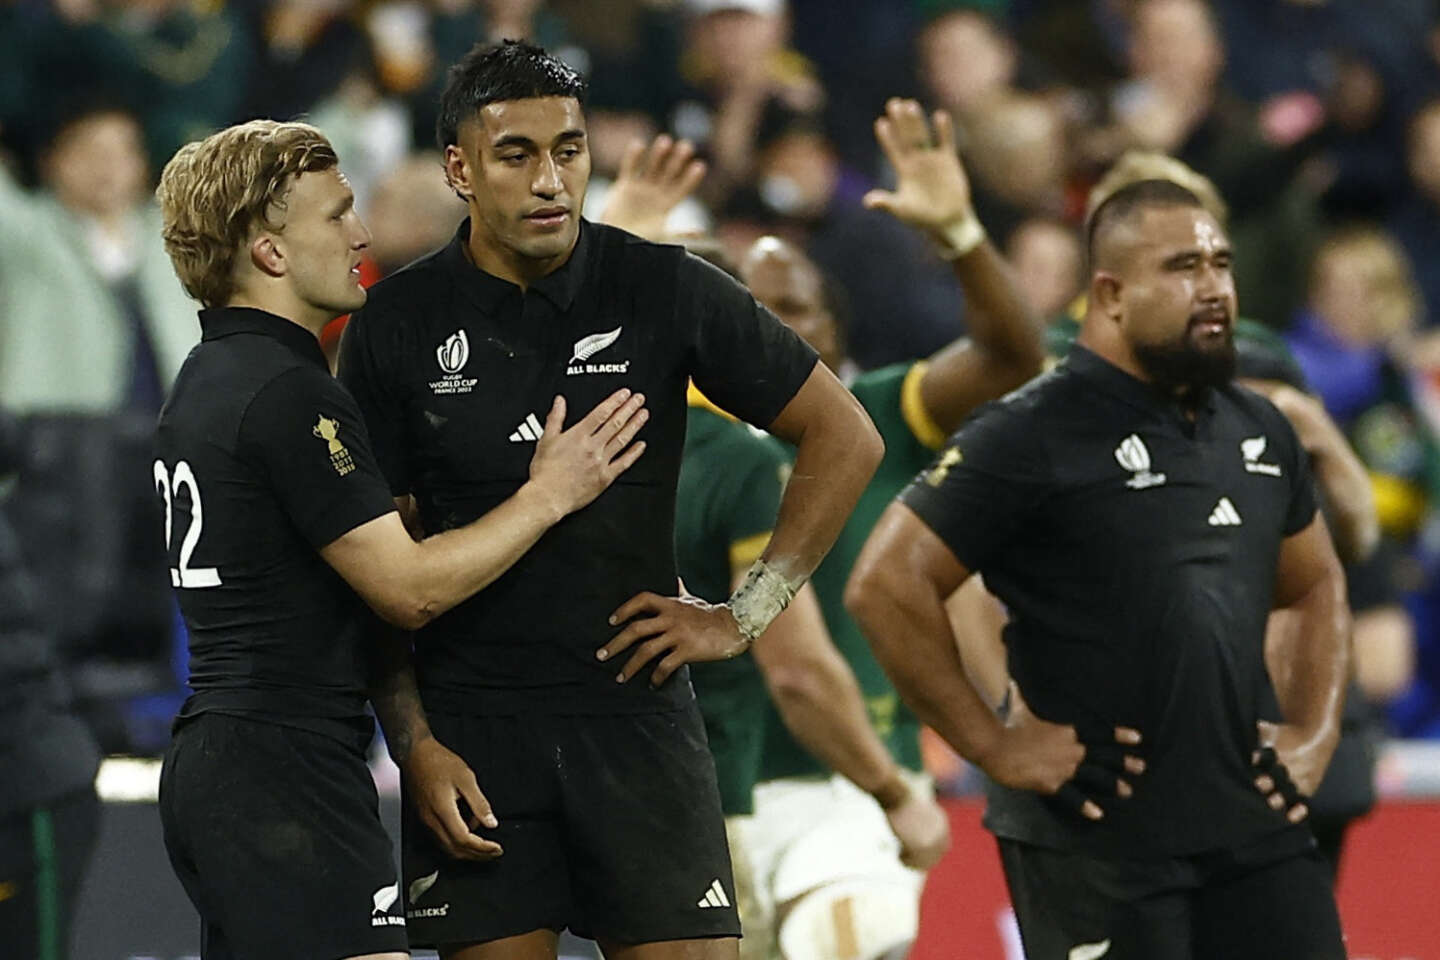 The All Blacks, even beaten in the Rugby World Cup final, have become a great team again